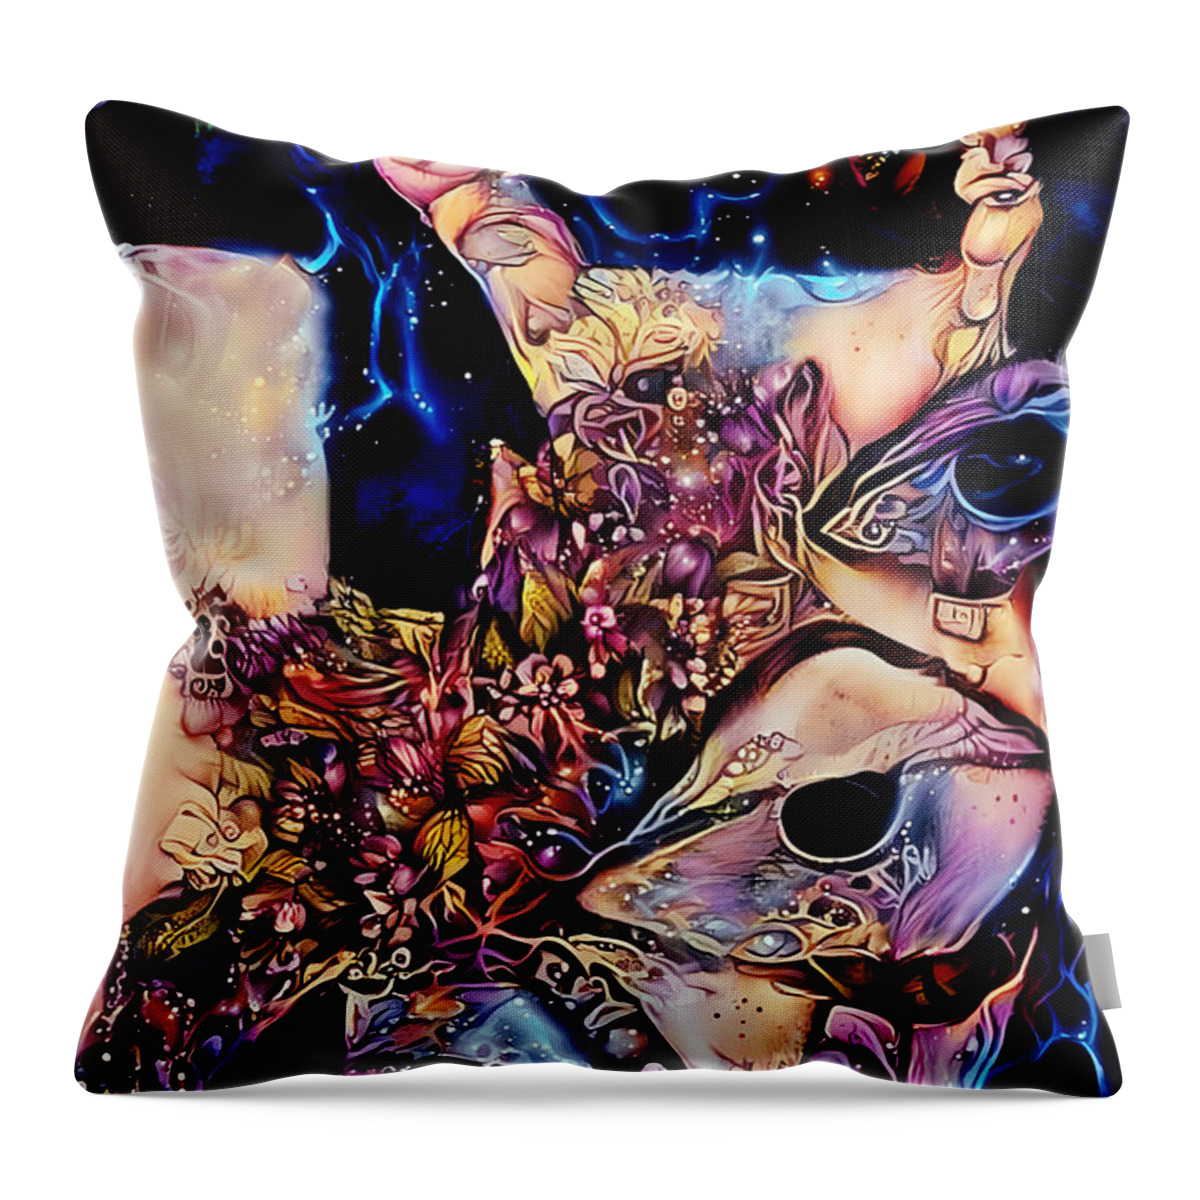 Contemporary Art Throw Pillow featuring the digital art 9 by Jeremiah Ray